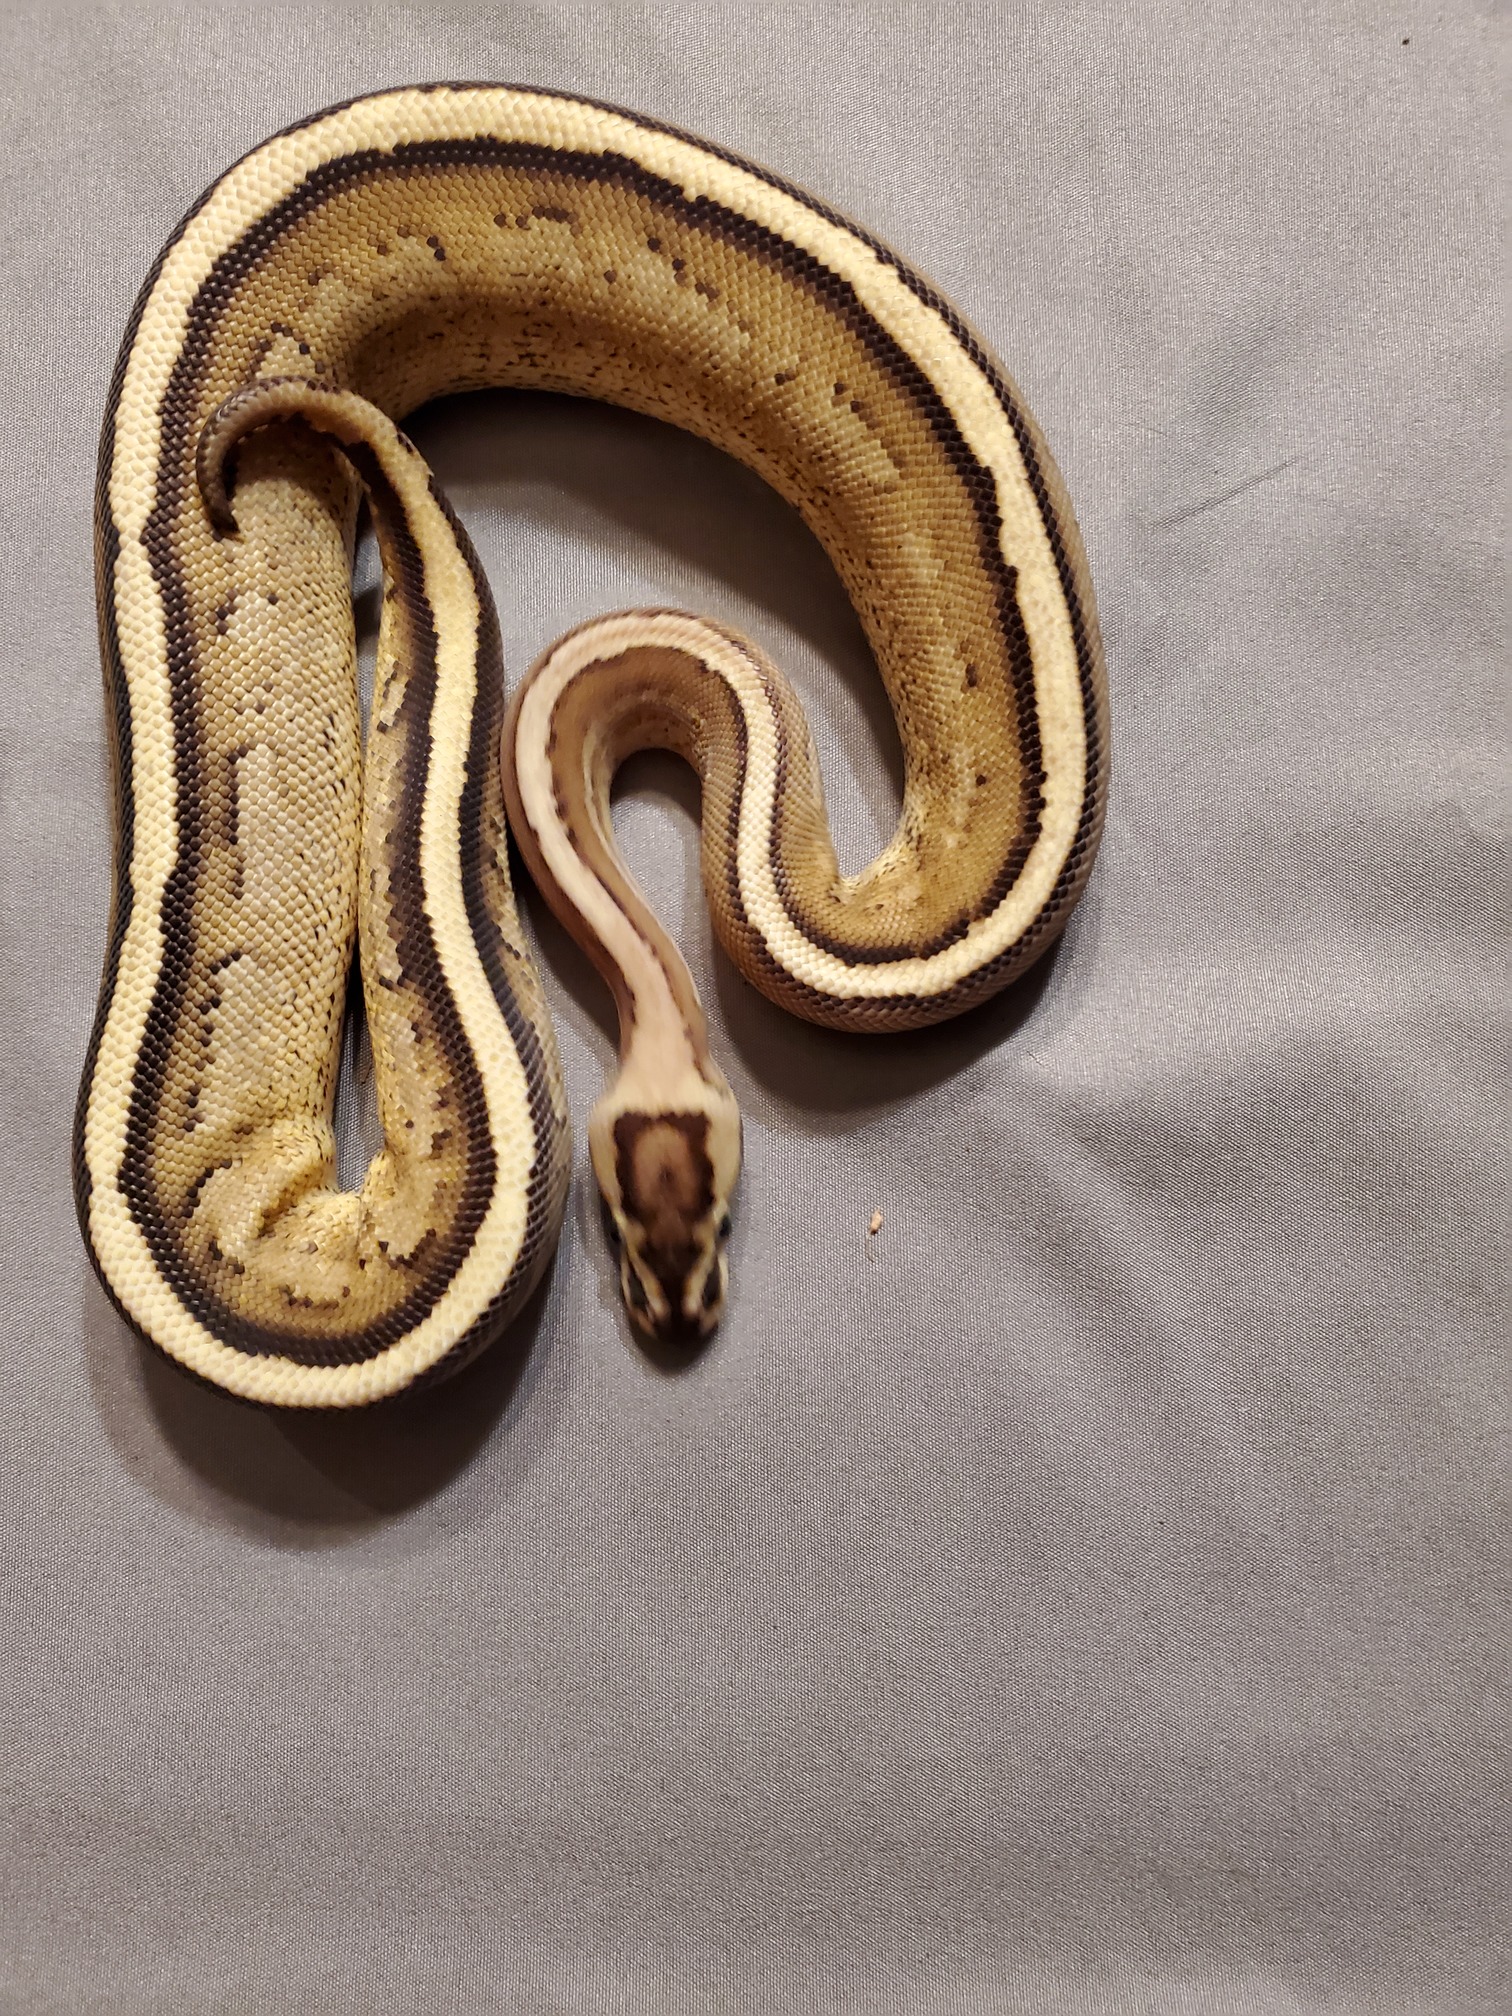 Super Spector Ball Python by Classy Reptiles